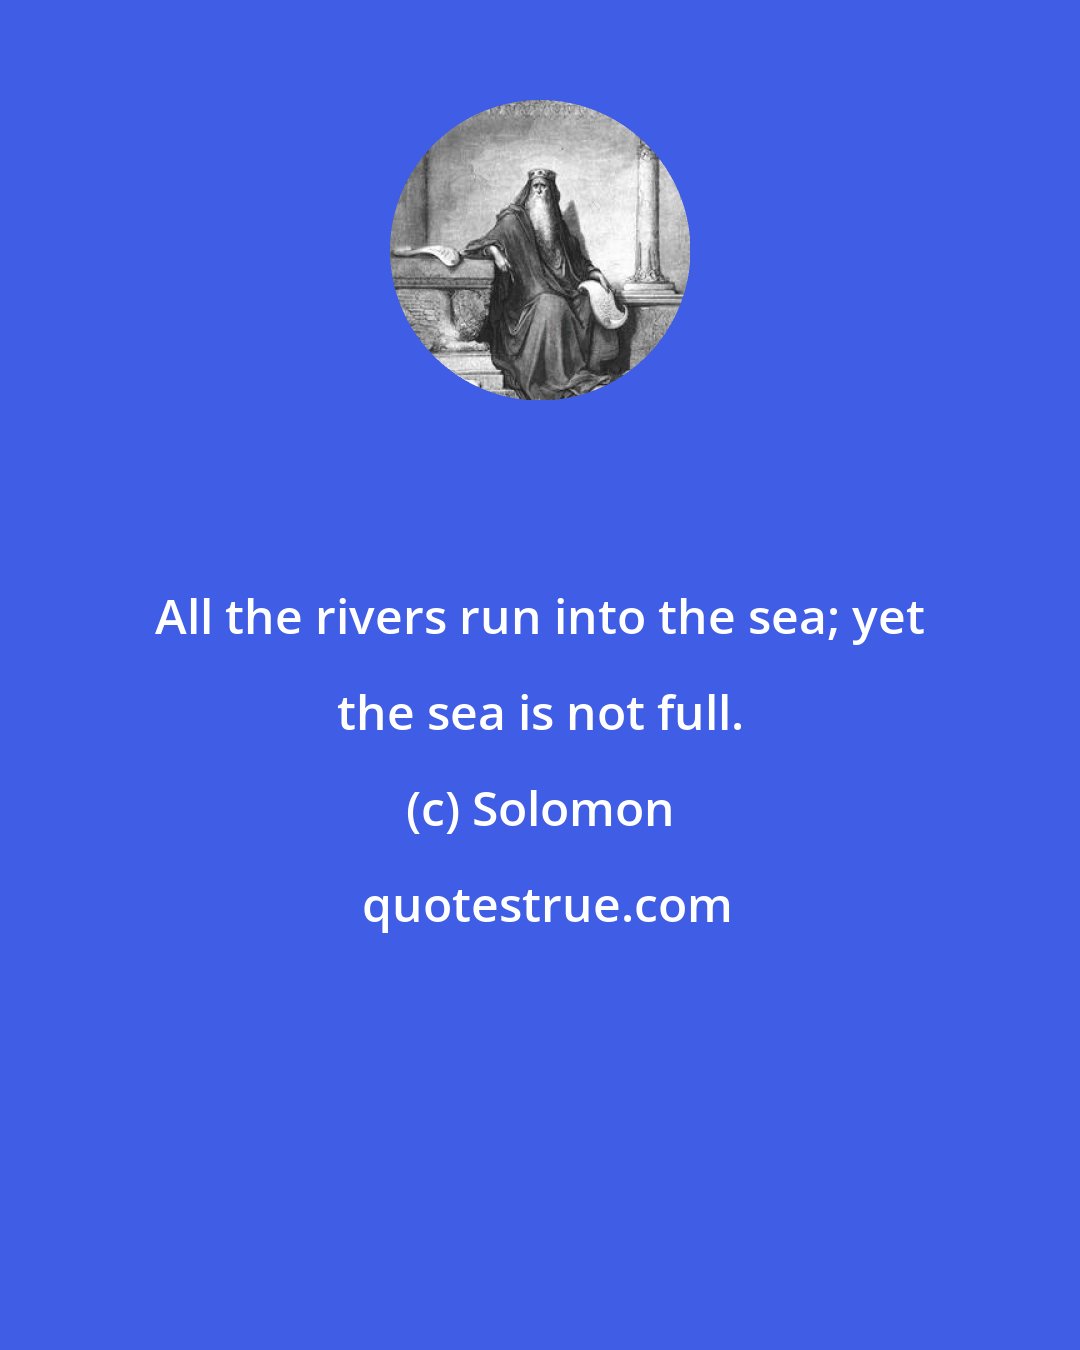 Solomon: All the rivers run into the sea; yet the sea is not full.